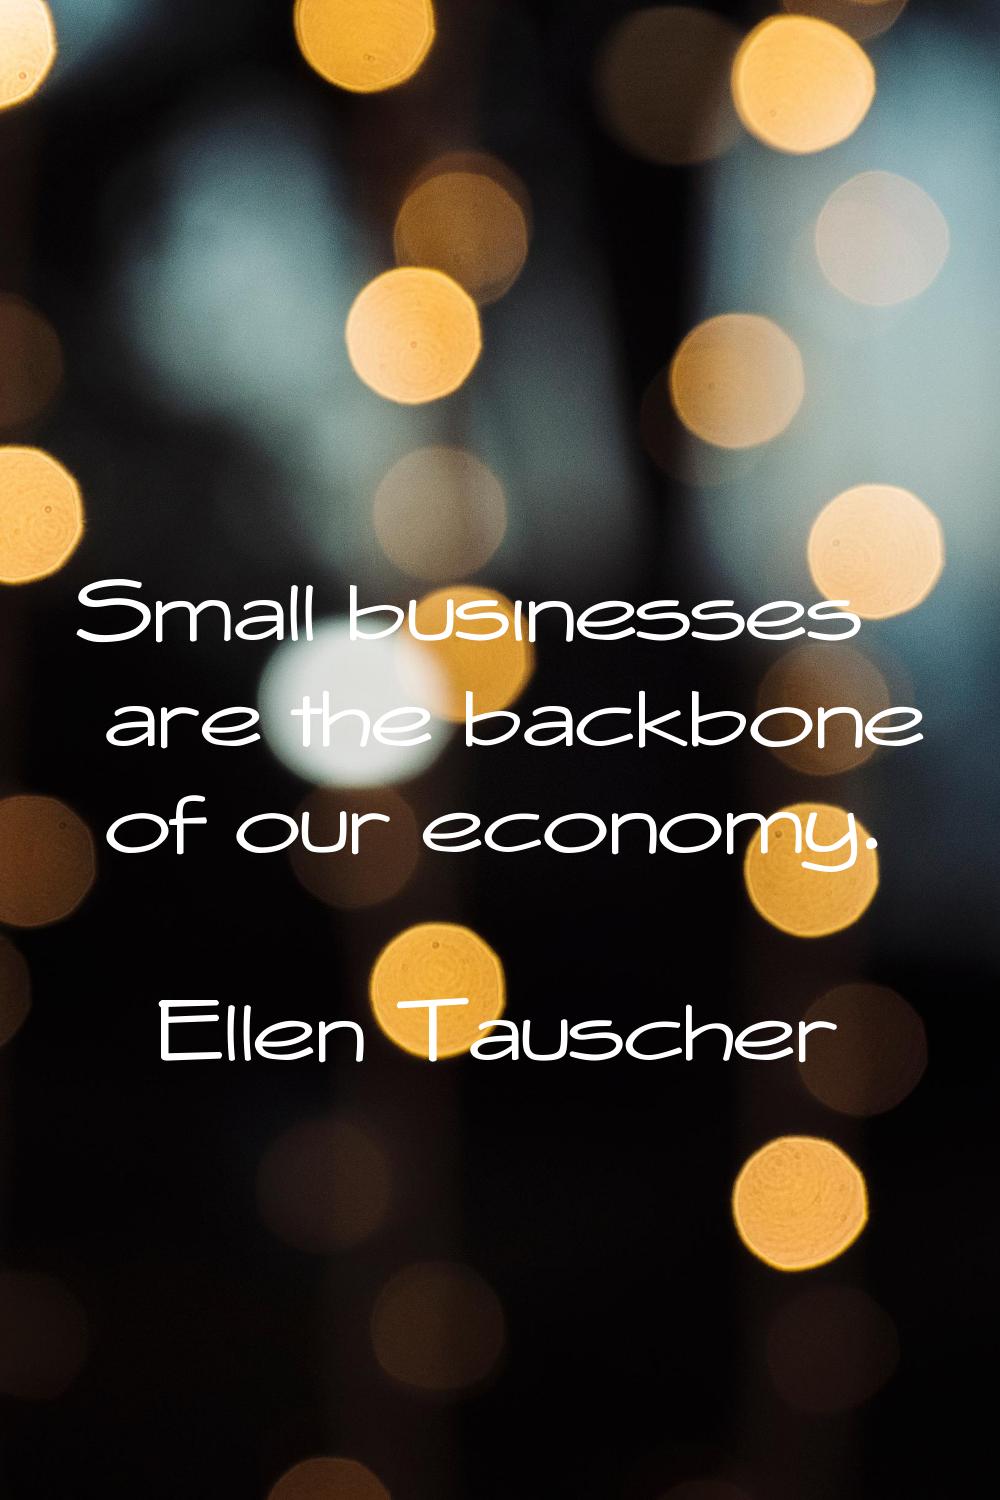 Small businesses are the backbone of our economy.